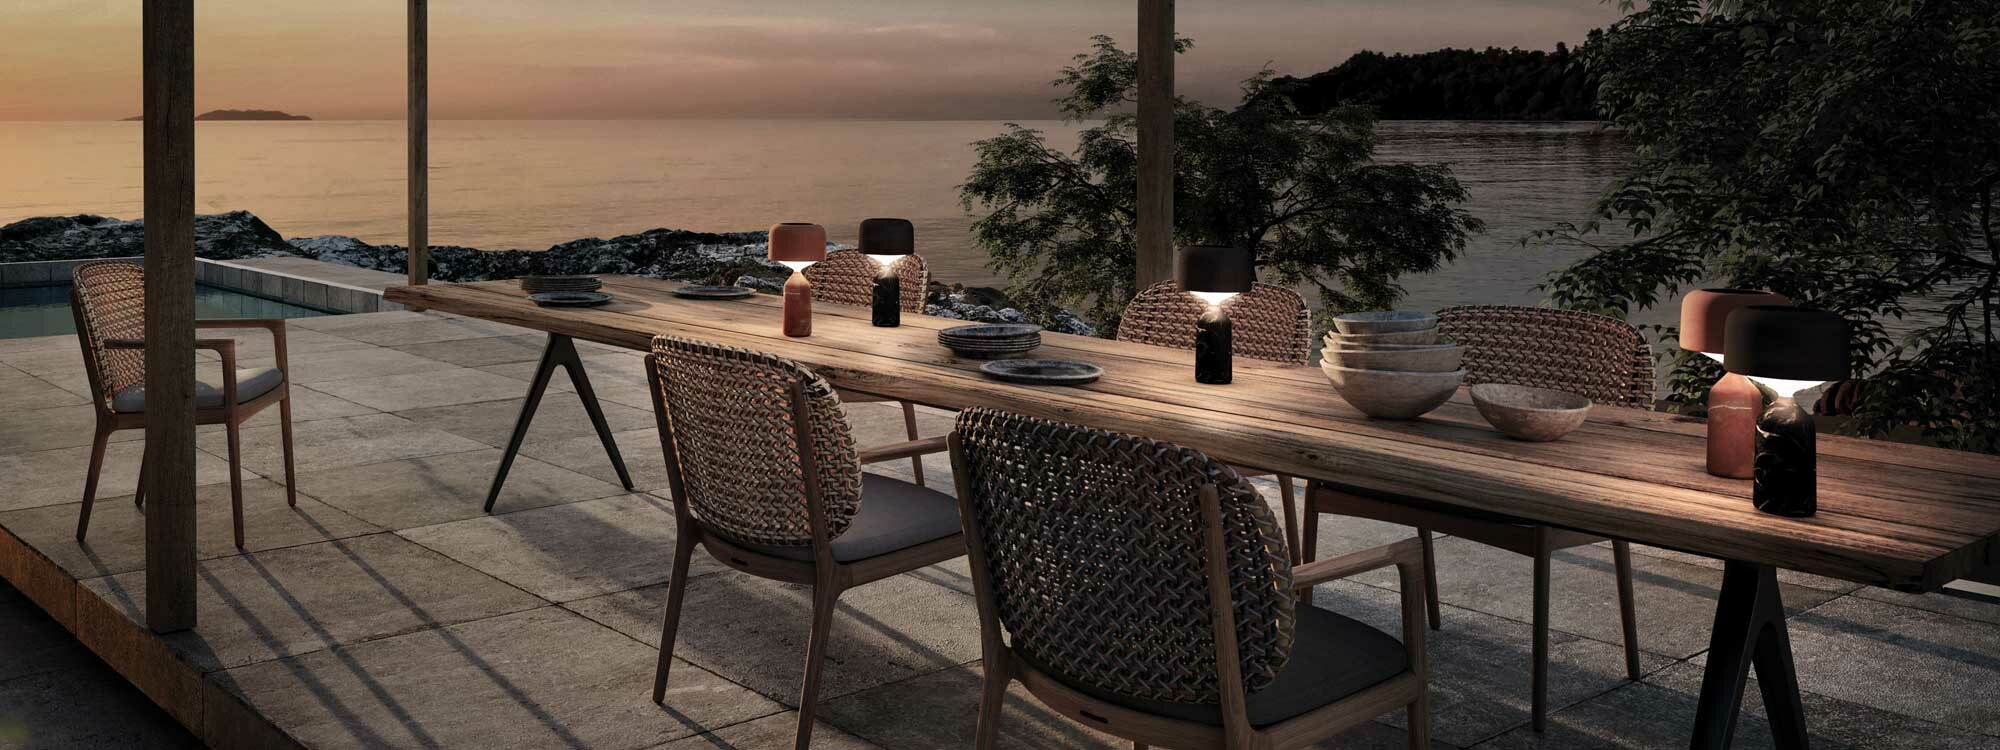 Image of Pebble modern outdoor table lamps on Raw table by Gloster at dusk